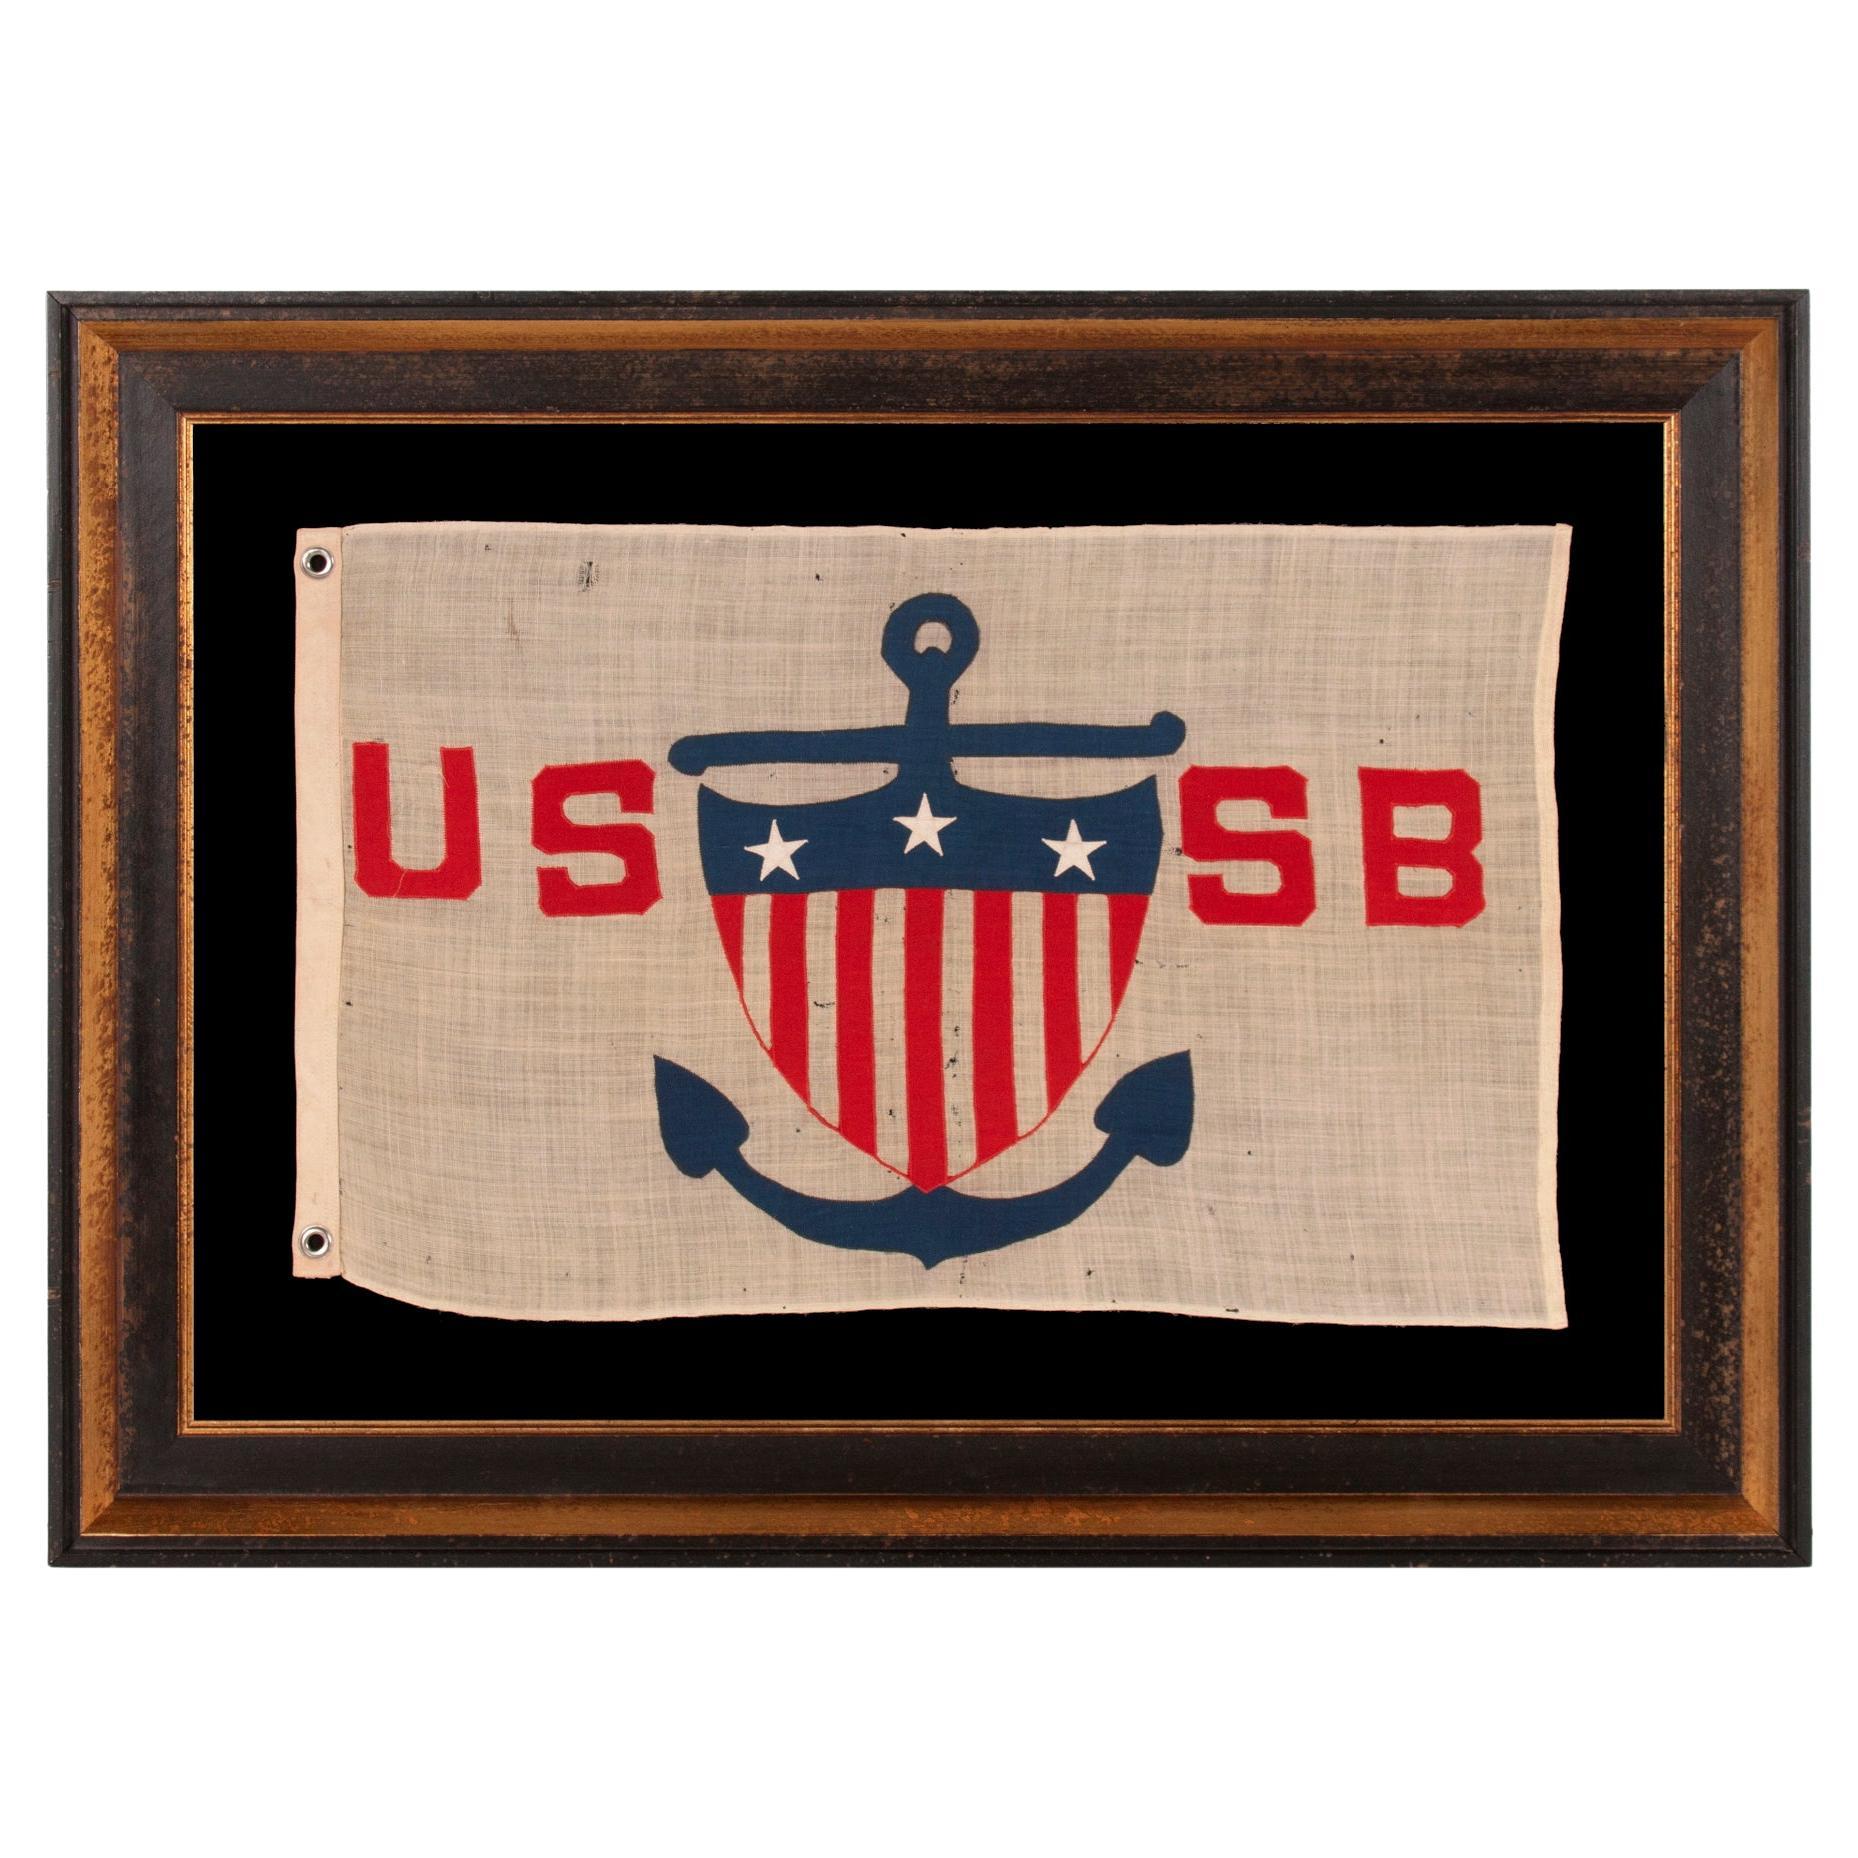 United State Shipping Board Flag, ca 1917-1934